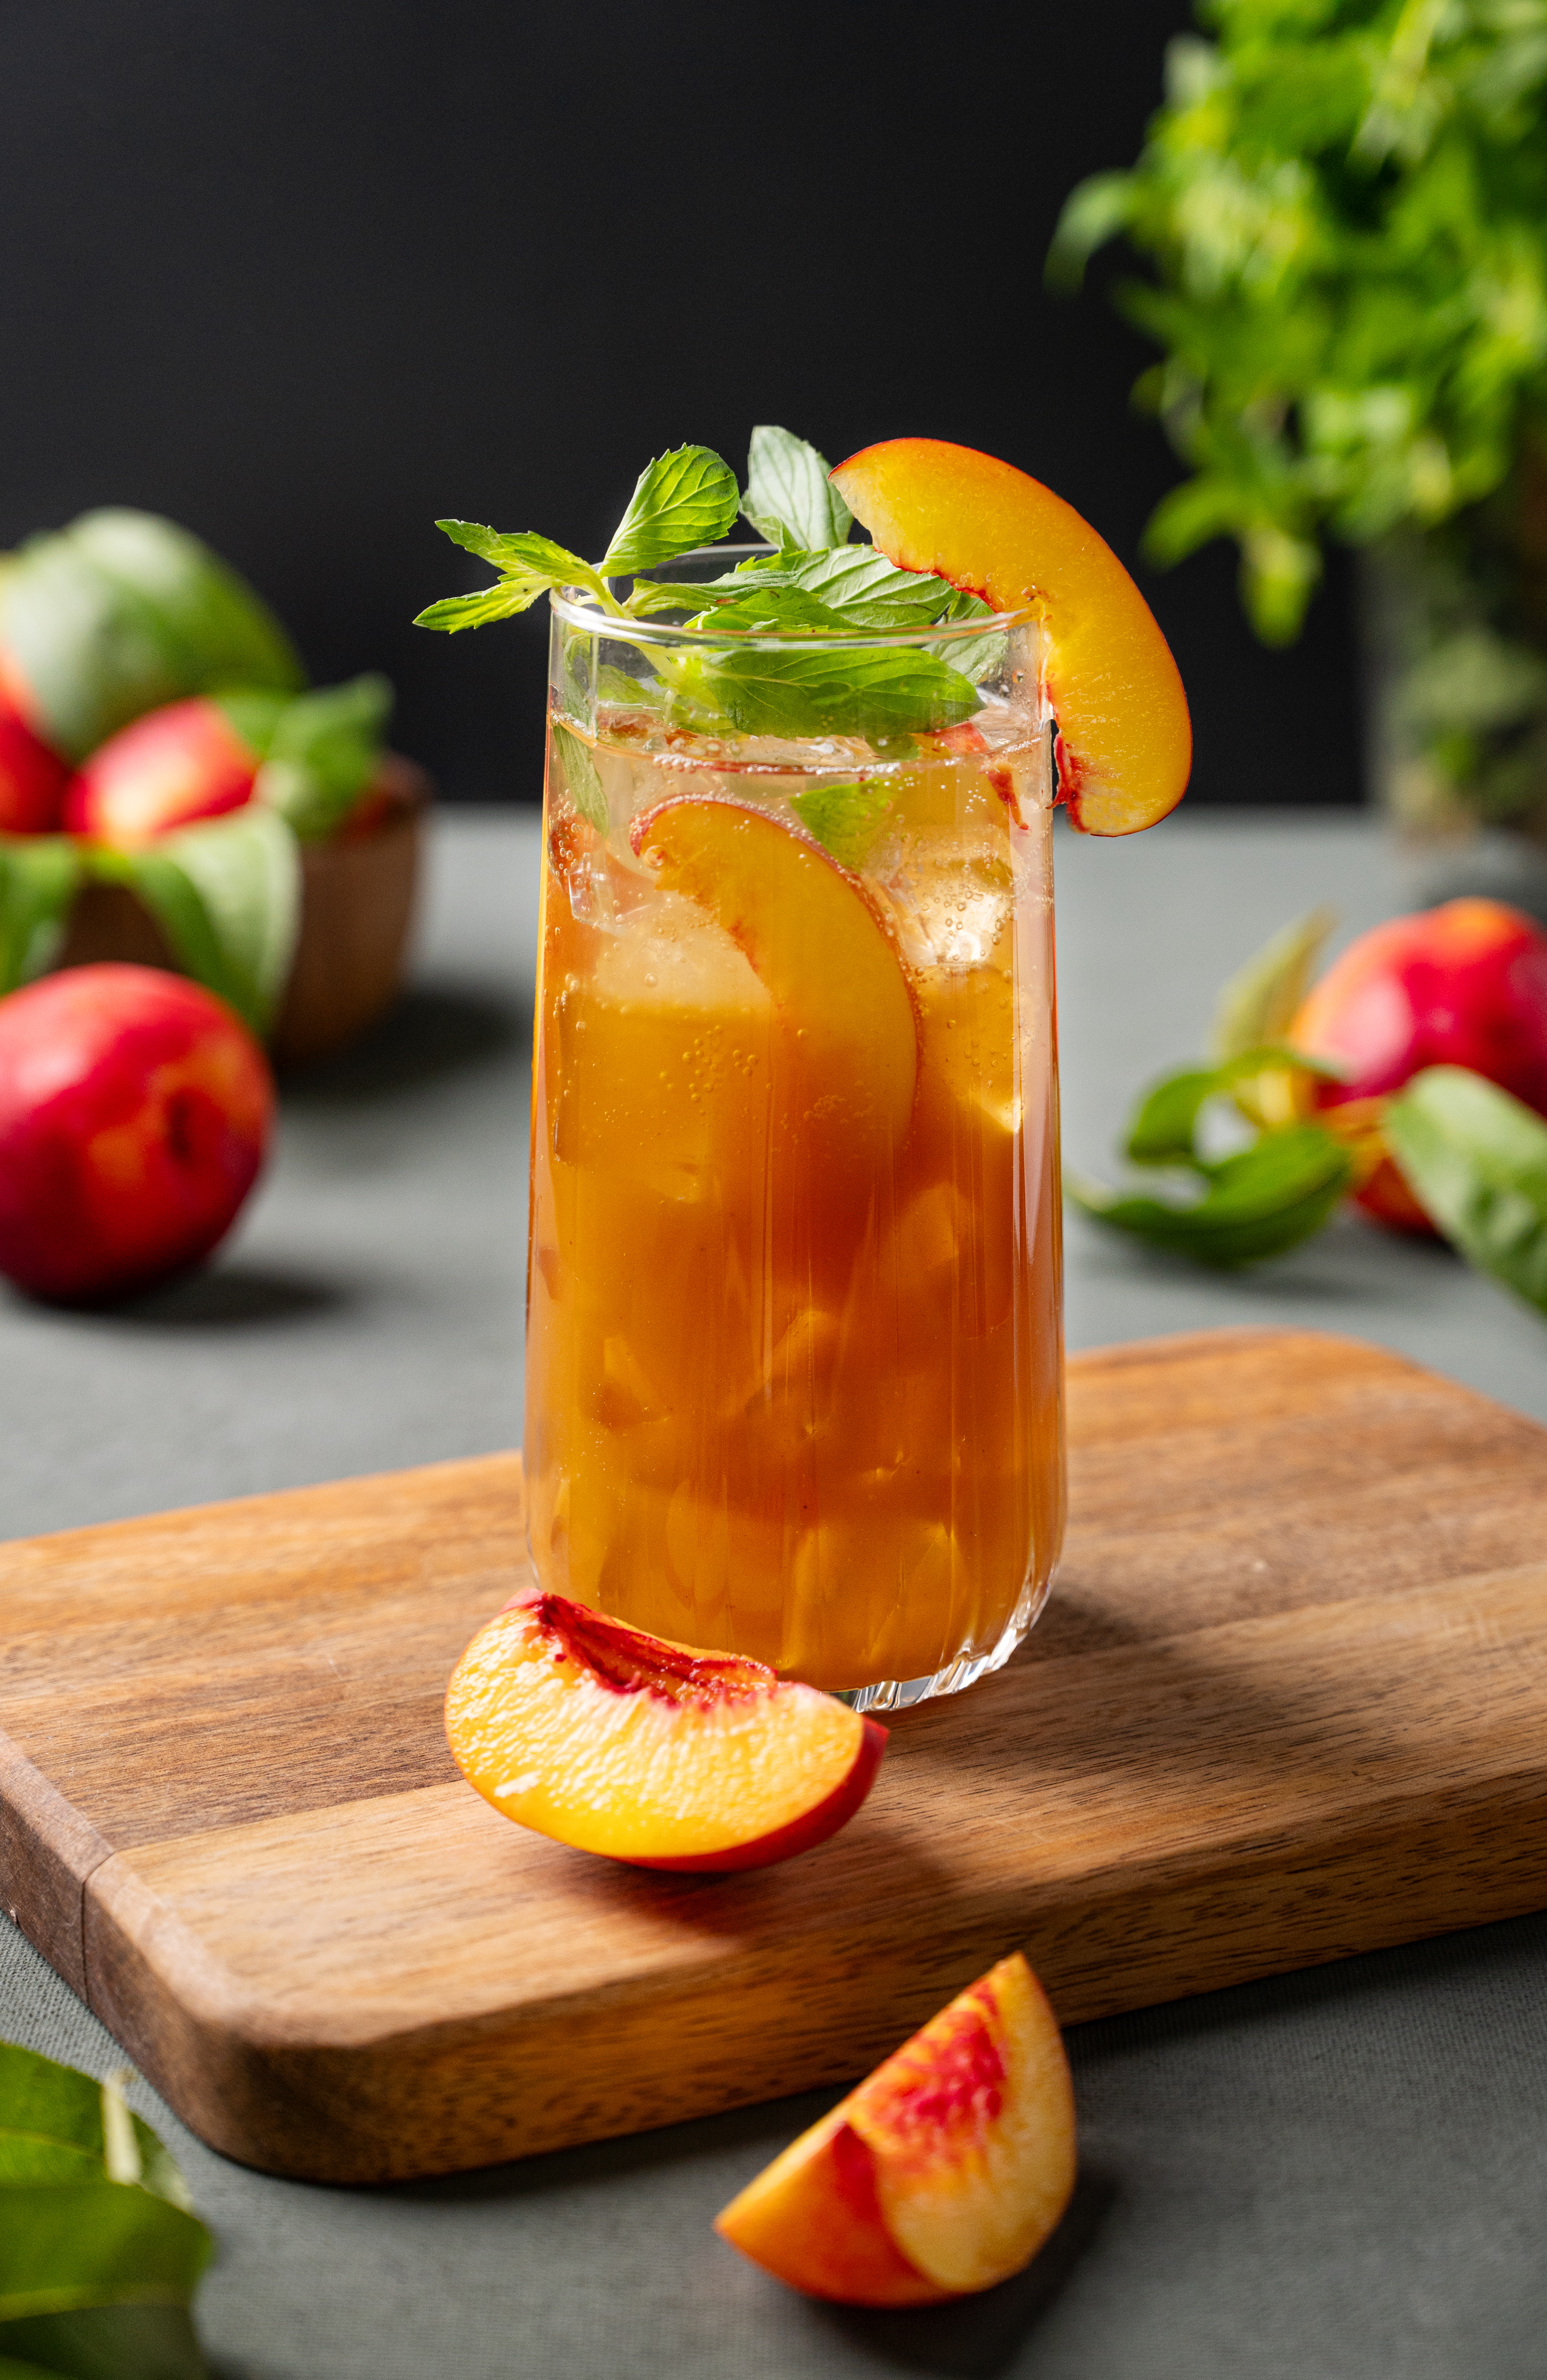 A glass of iced tea garnished with fresh mint and peach slices on a wooden board